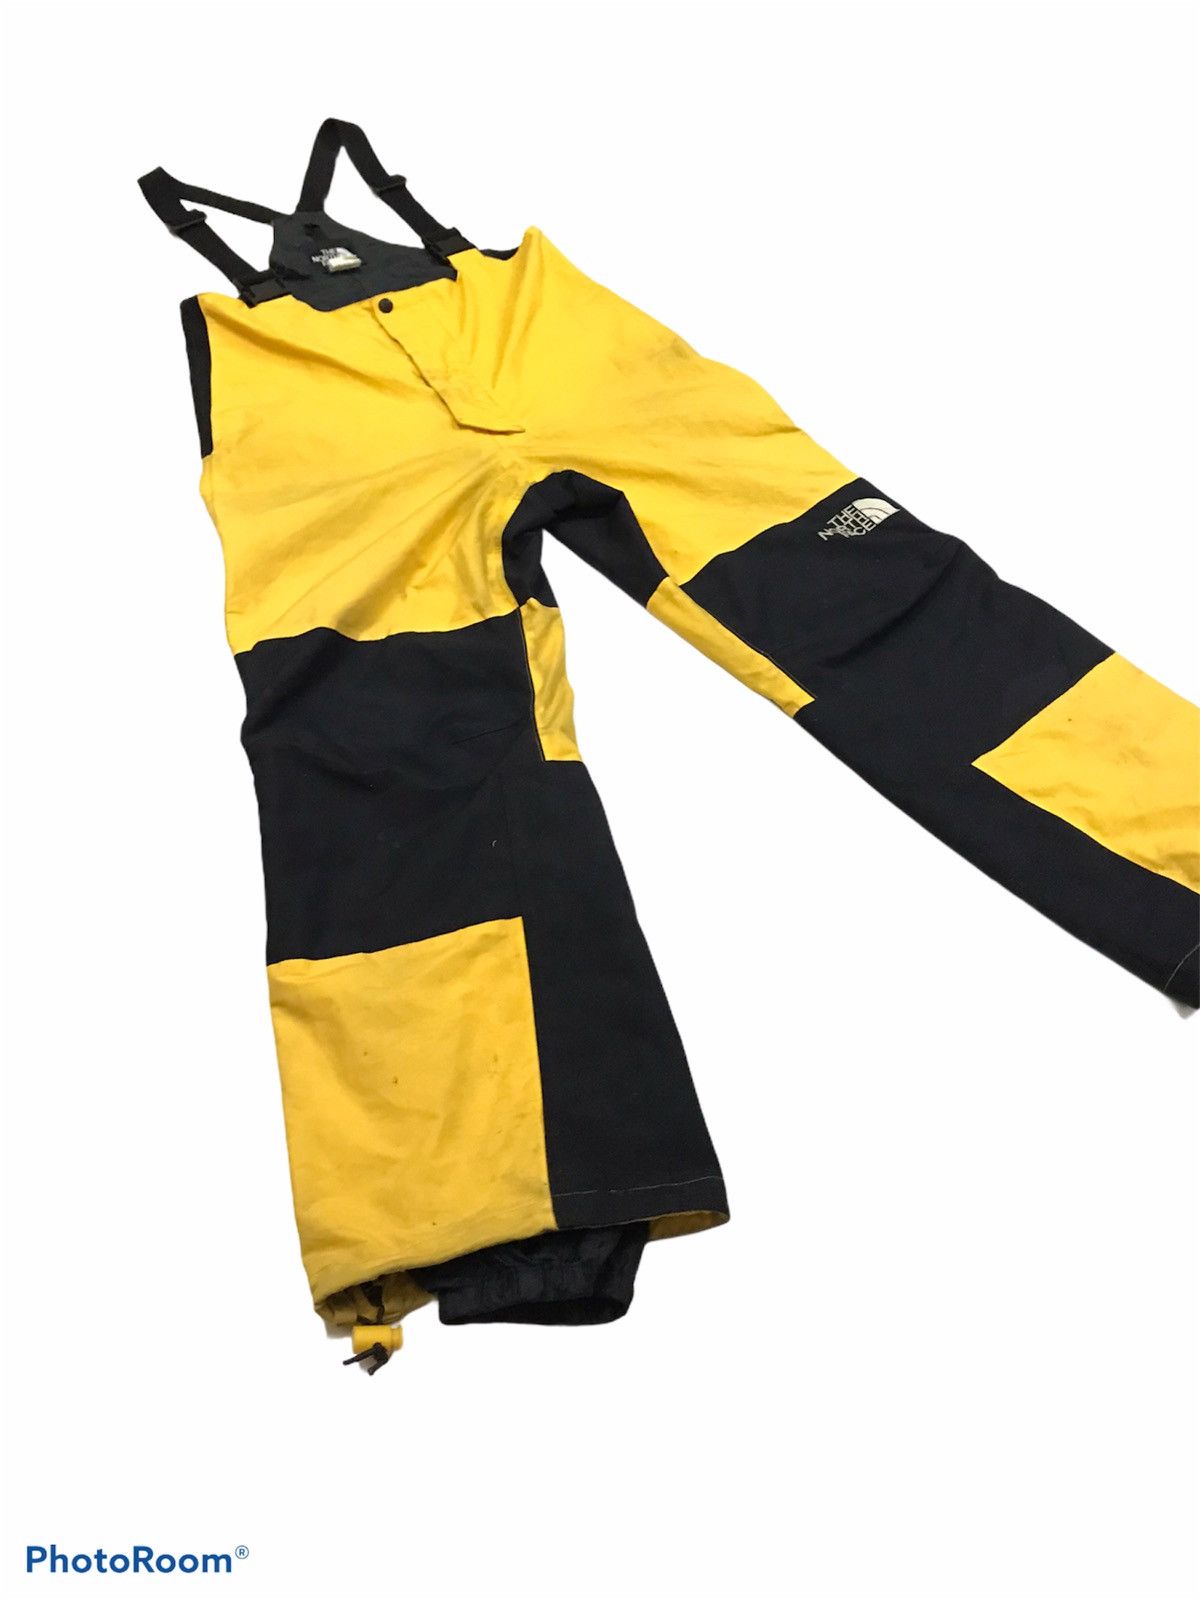 THE NORTH FACE” GORE-TEX SKI PANTS BIBS OVERALLS IN YELLOW - 2